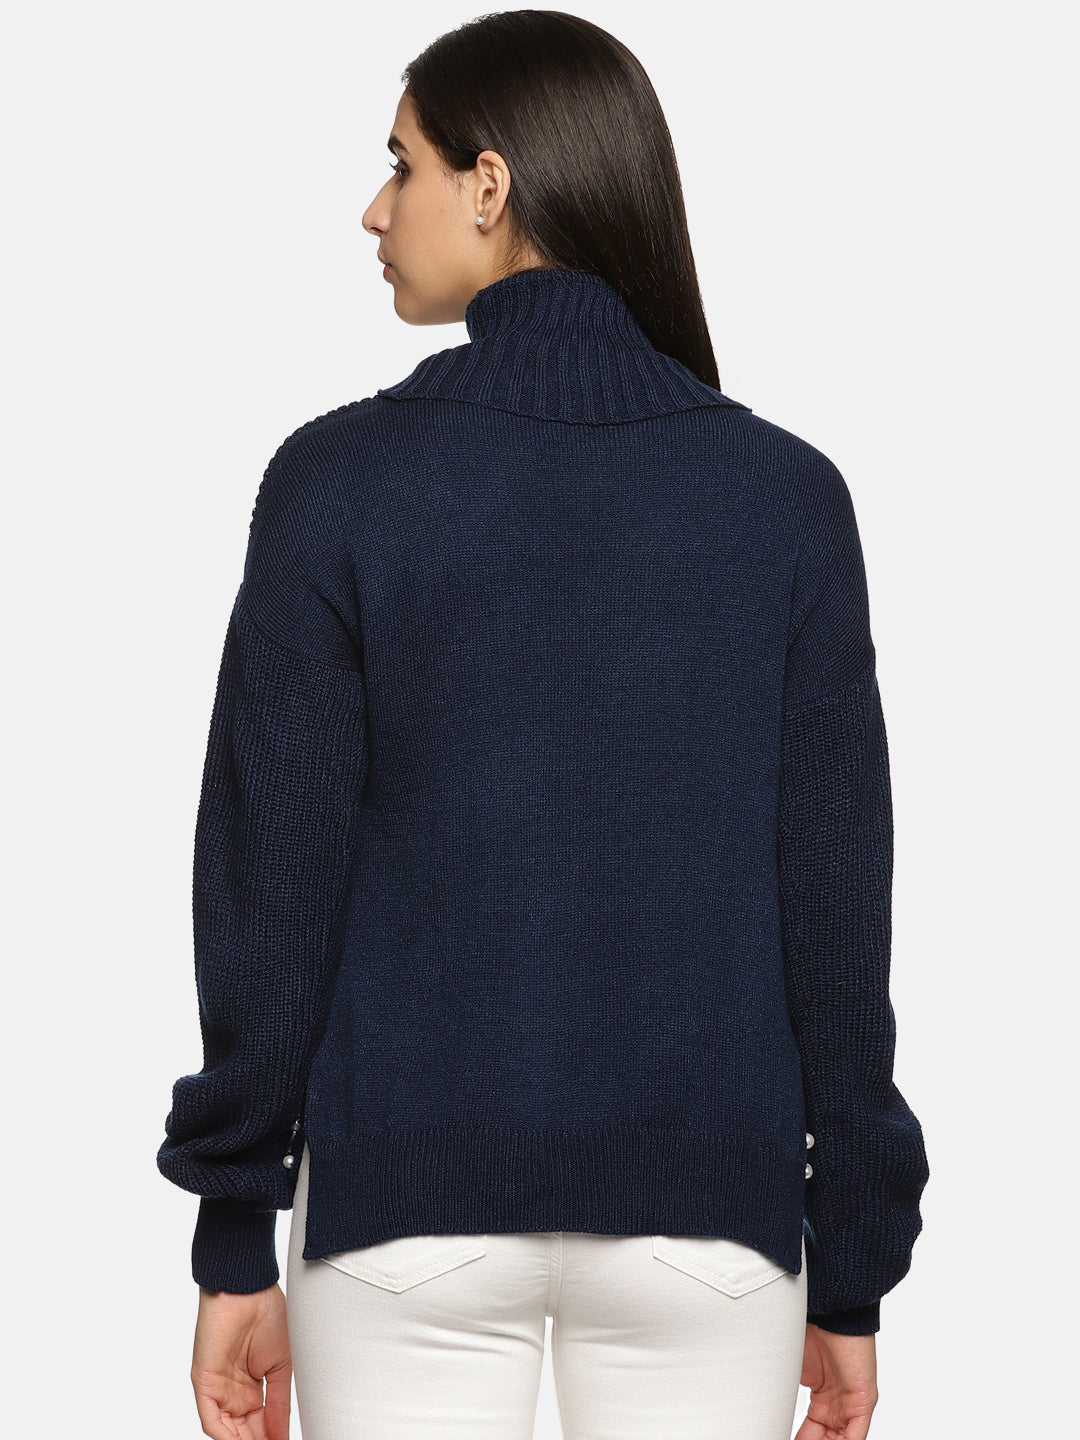 IS.U Navy Pearl High Neck Oversized Knitted Sweater